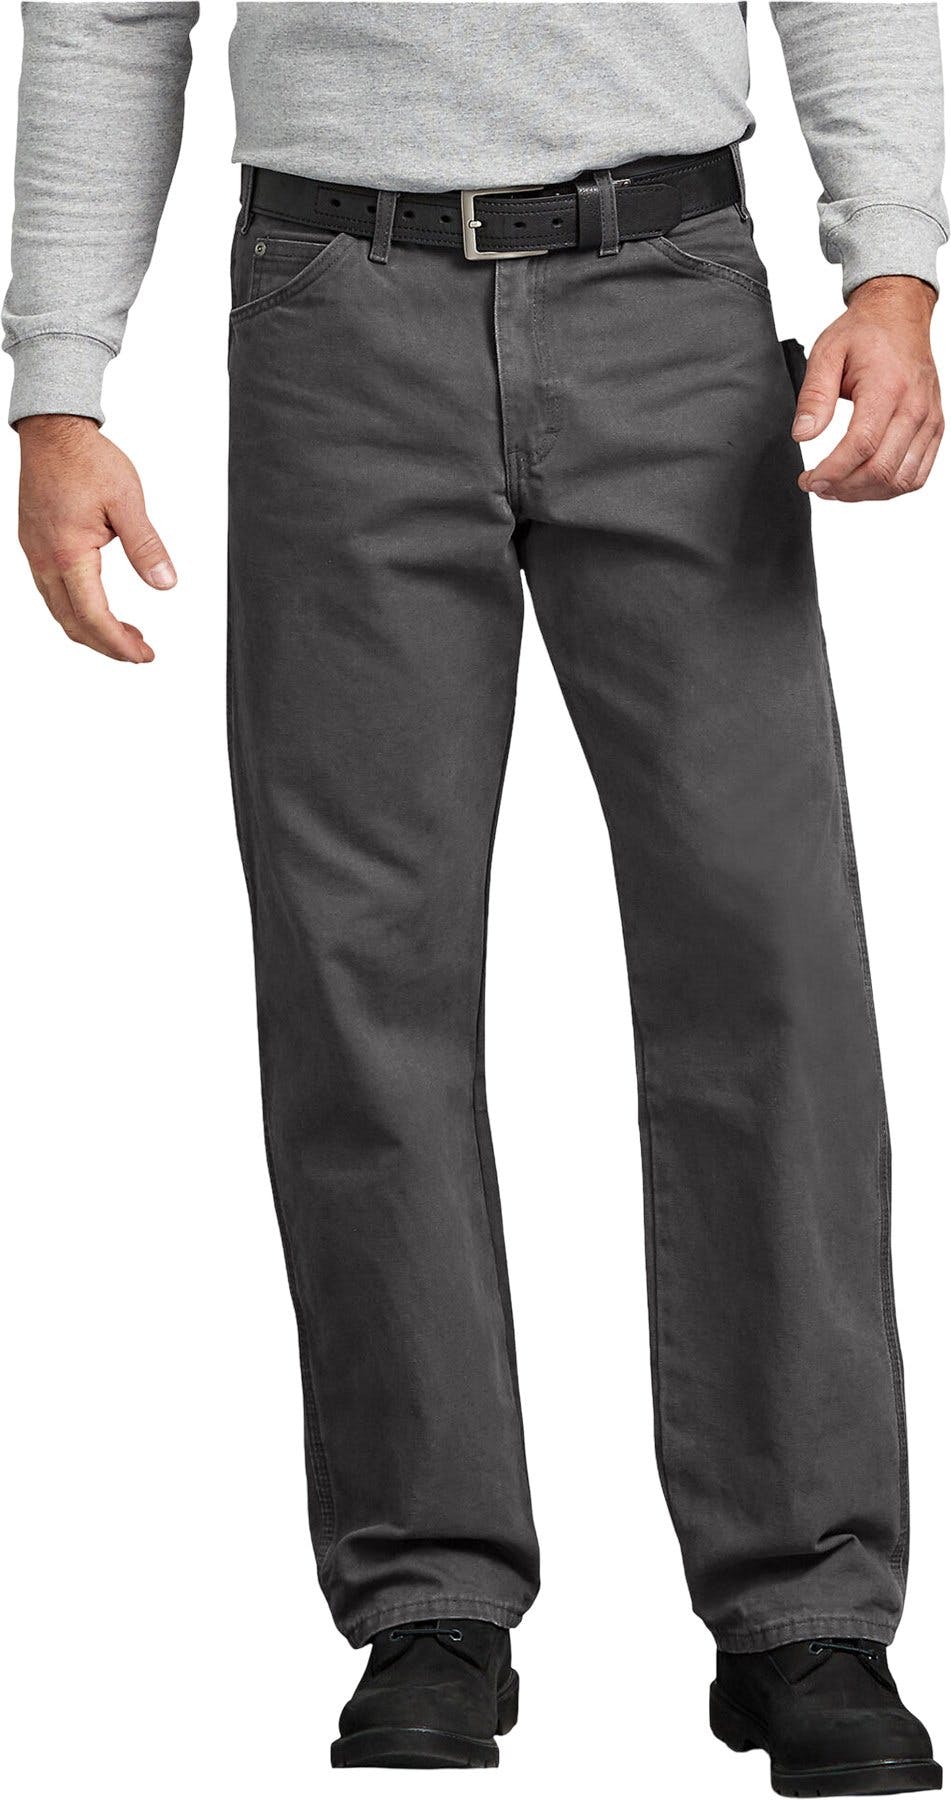 Product image for Relaxed Fit Straight Leg Carpenter Duck Jeans - Men's